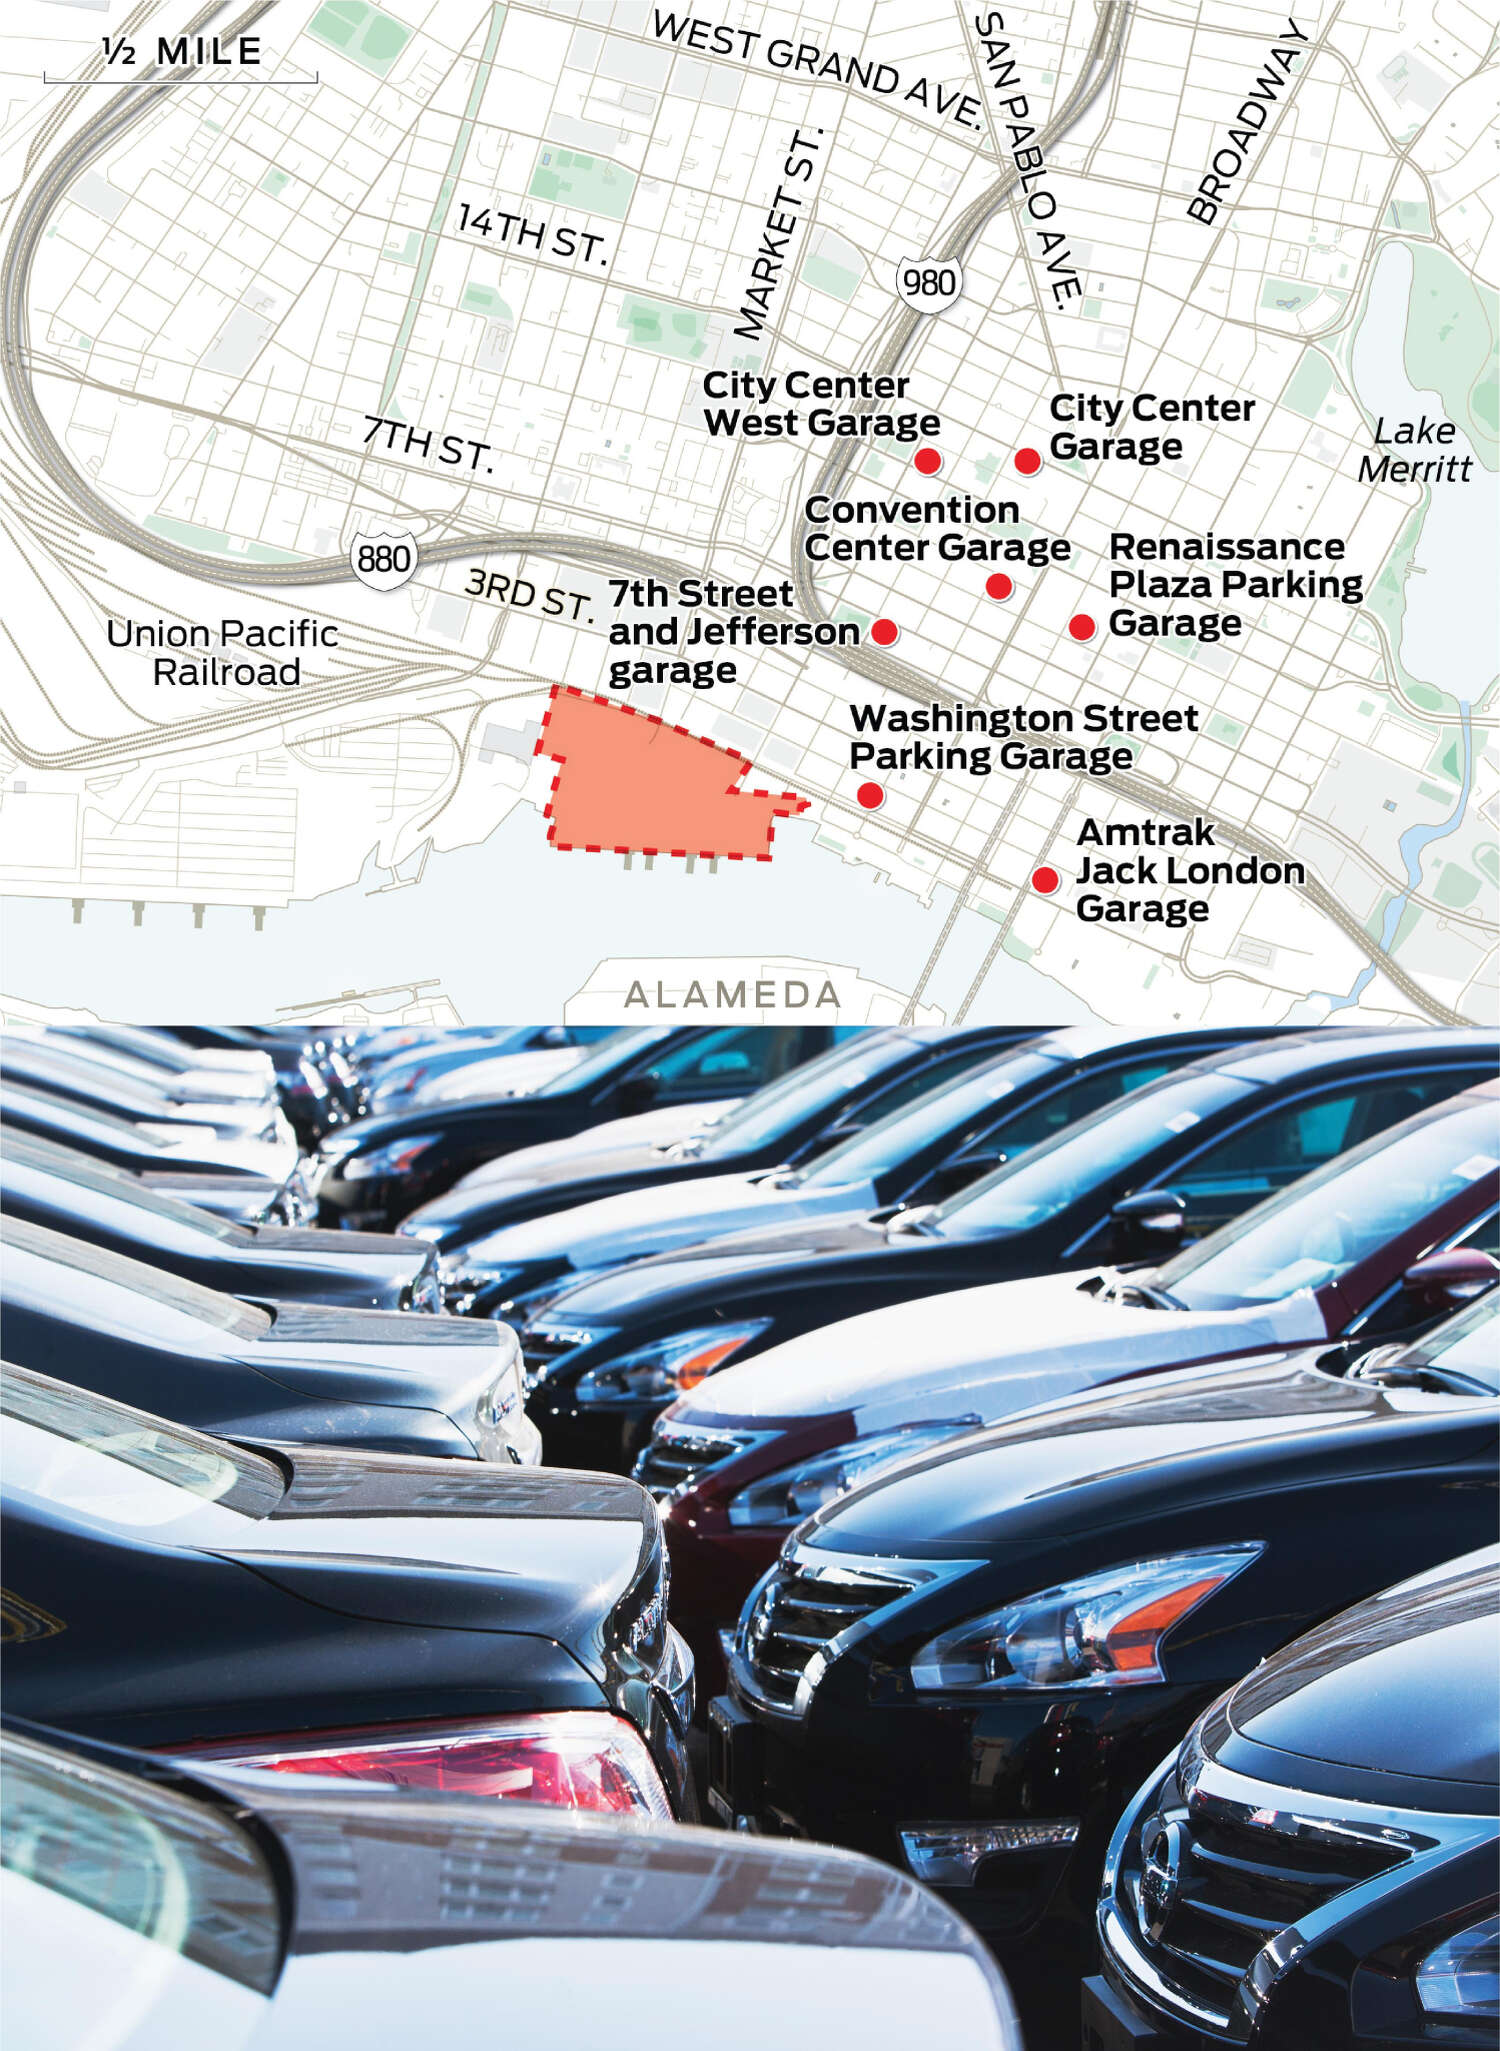 A selection of off-site parking garages near Howard Terminal is plotted on the map. A close-up of cars is shown.